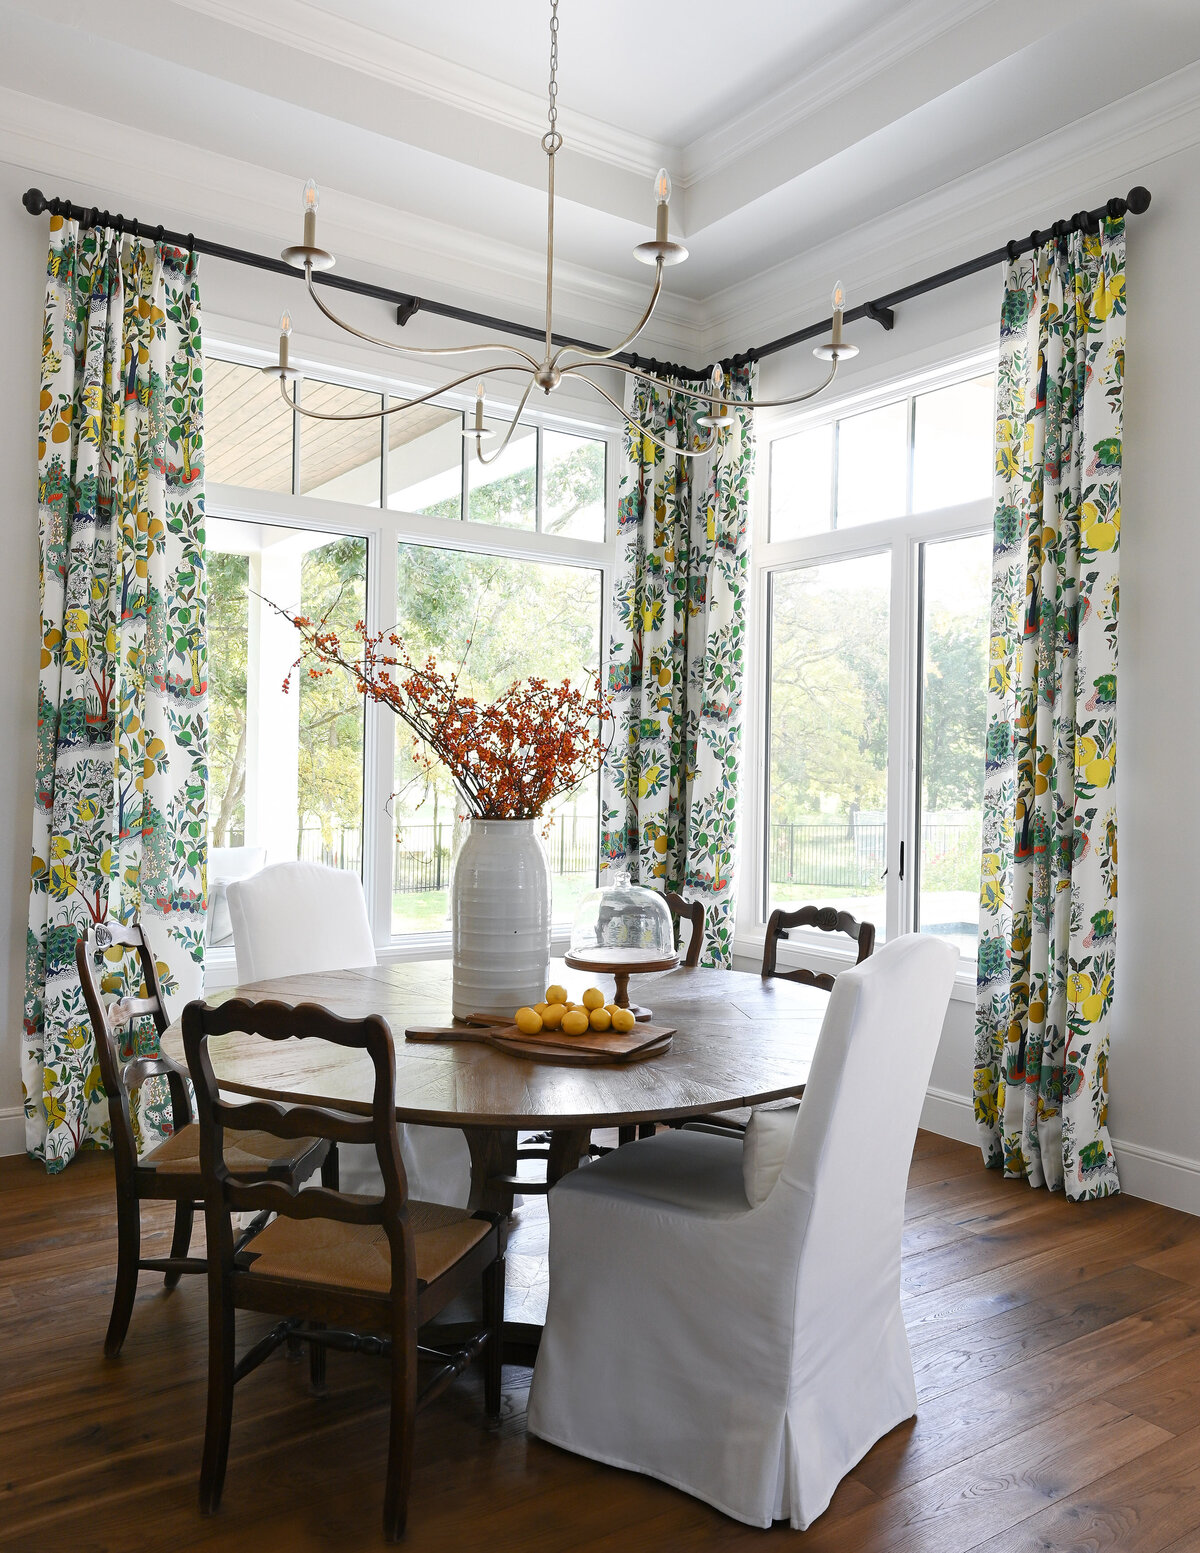 kitchen nook with large windows and patterned curtains